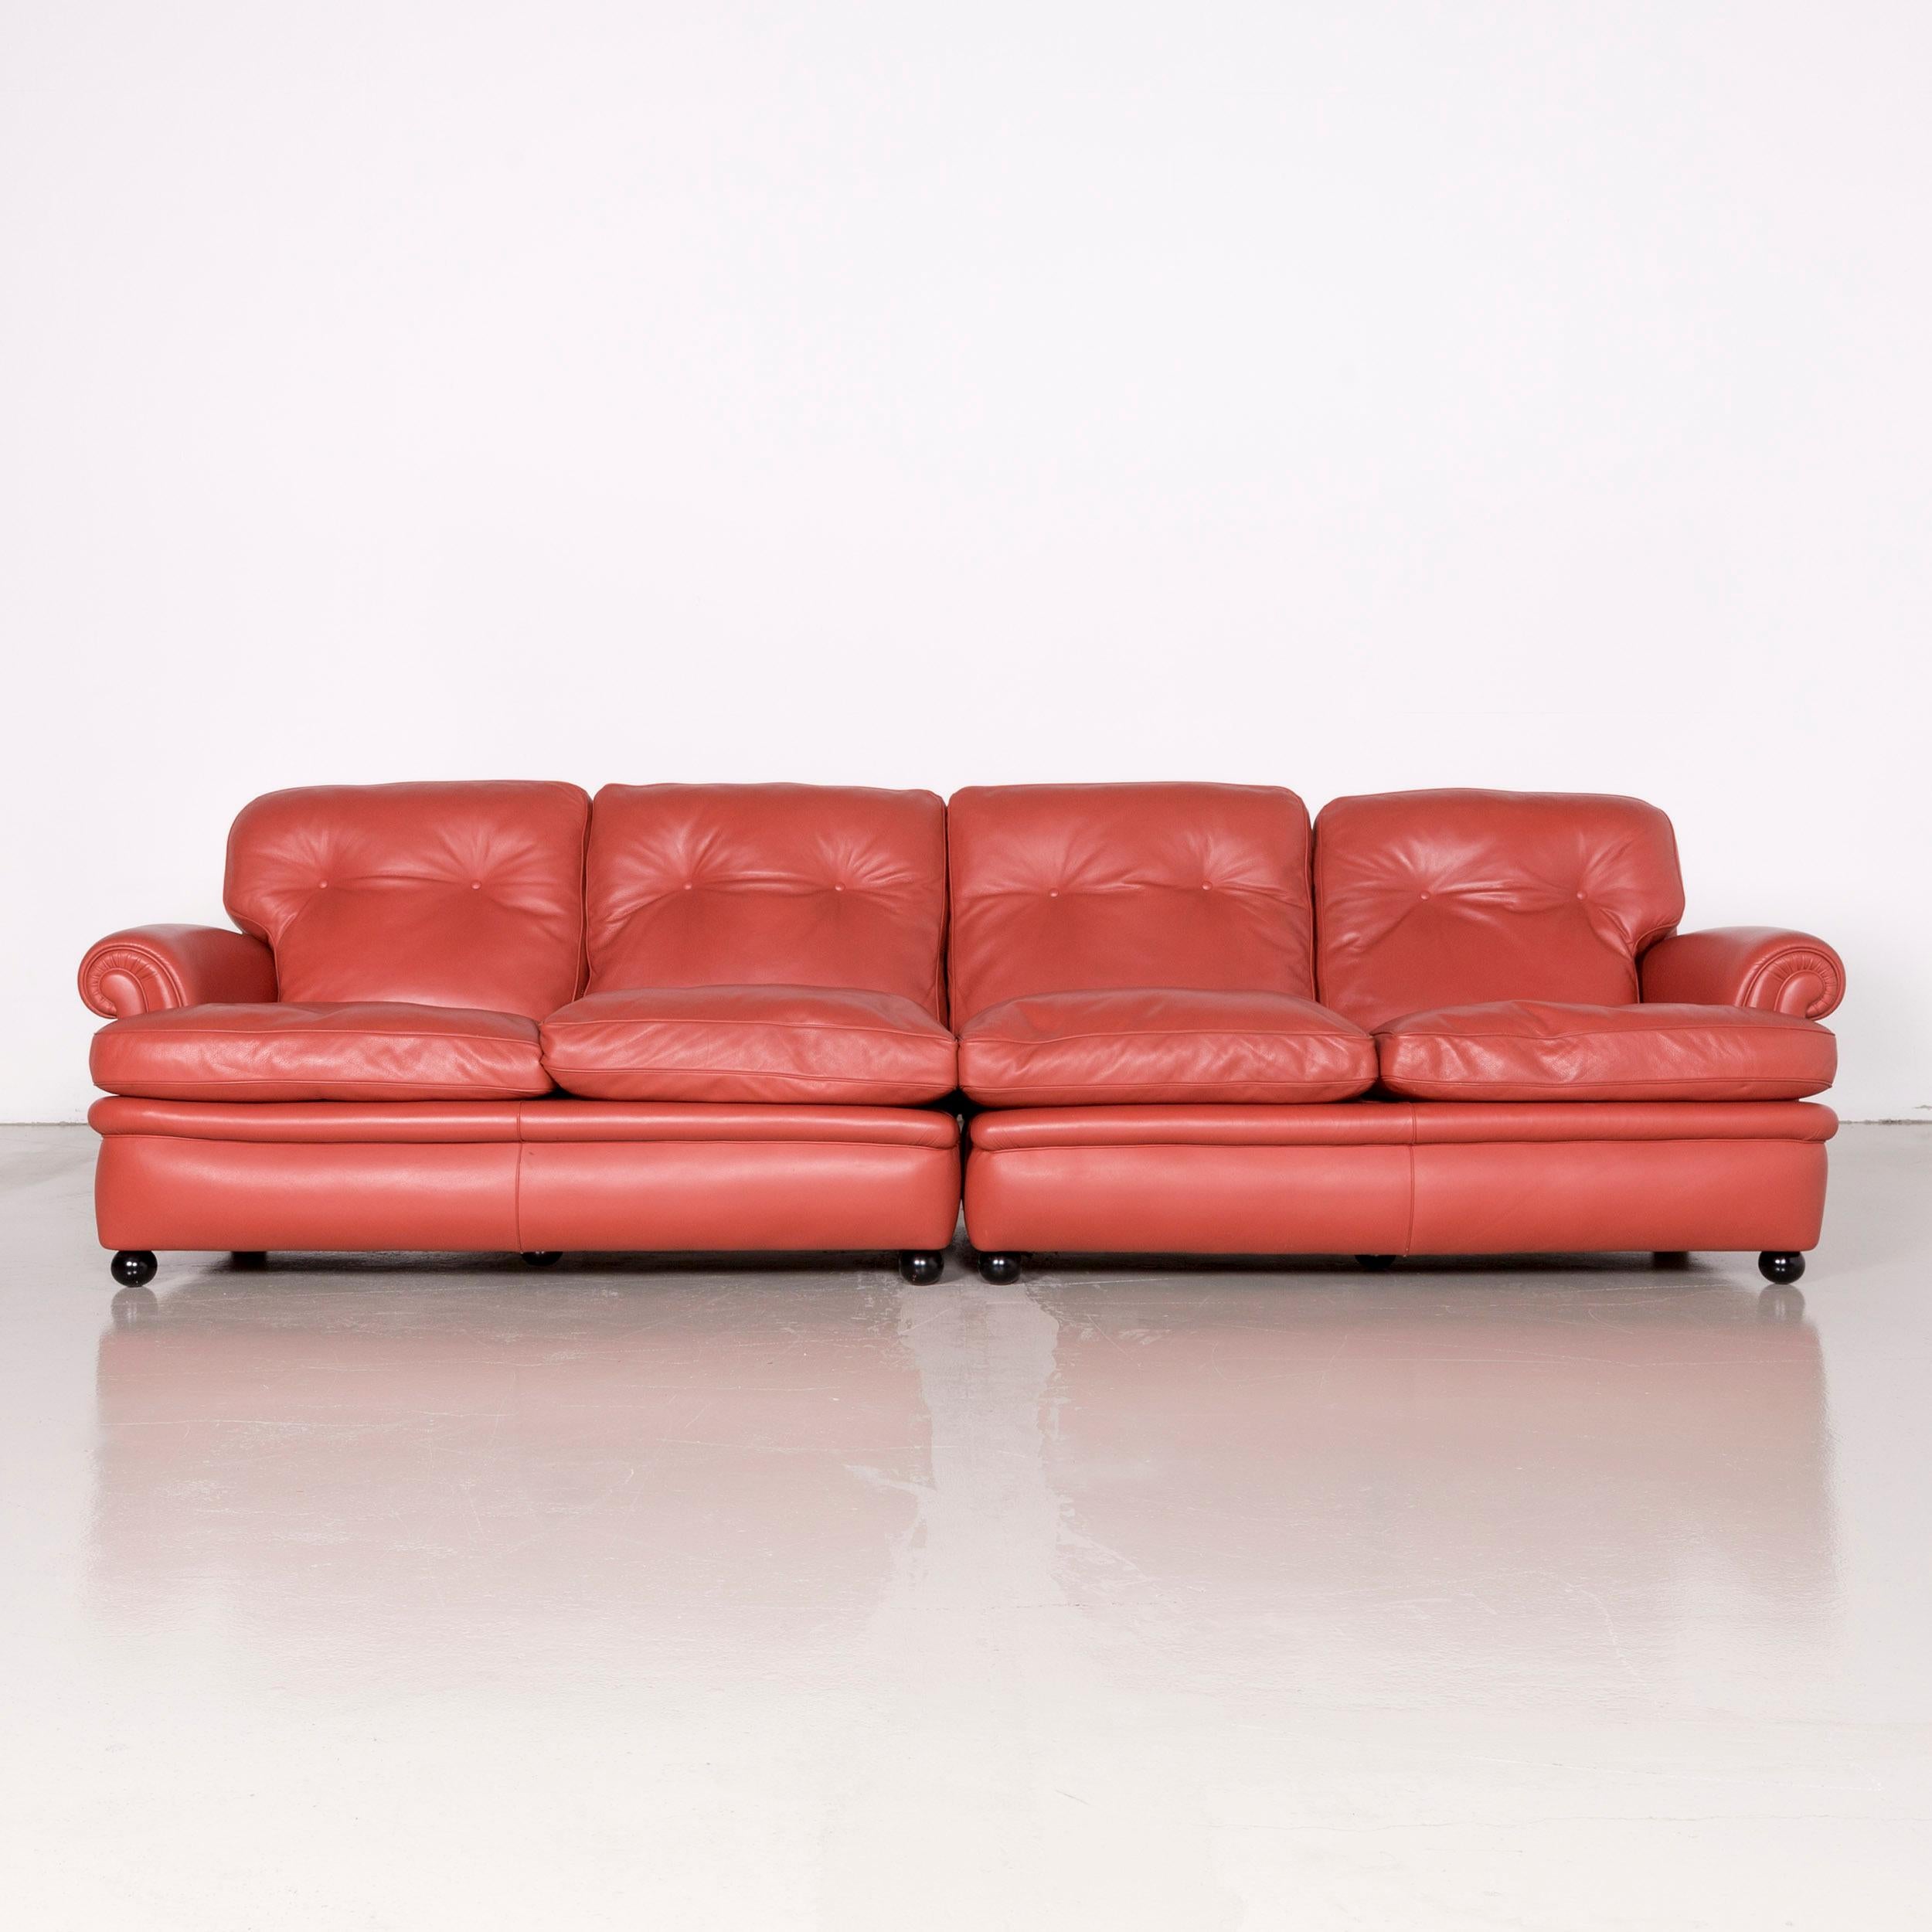 We bring to you a Poltrona Frau dream on sofa footstool set designer leather three-seat couch orange.